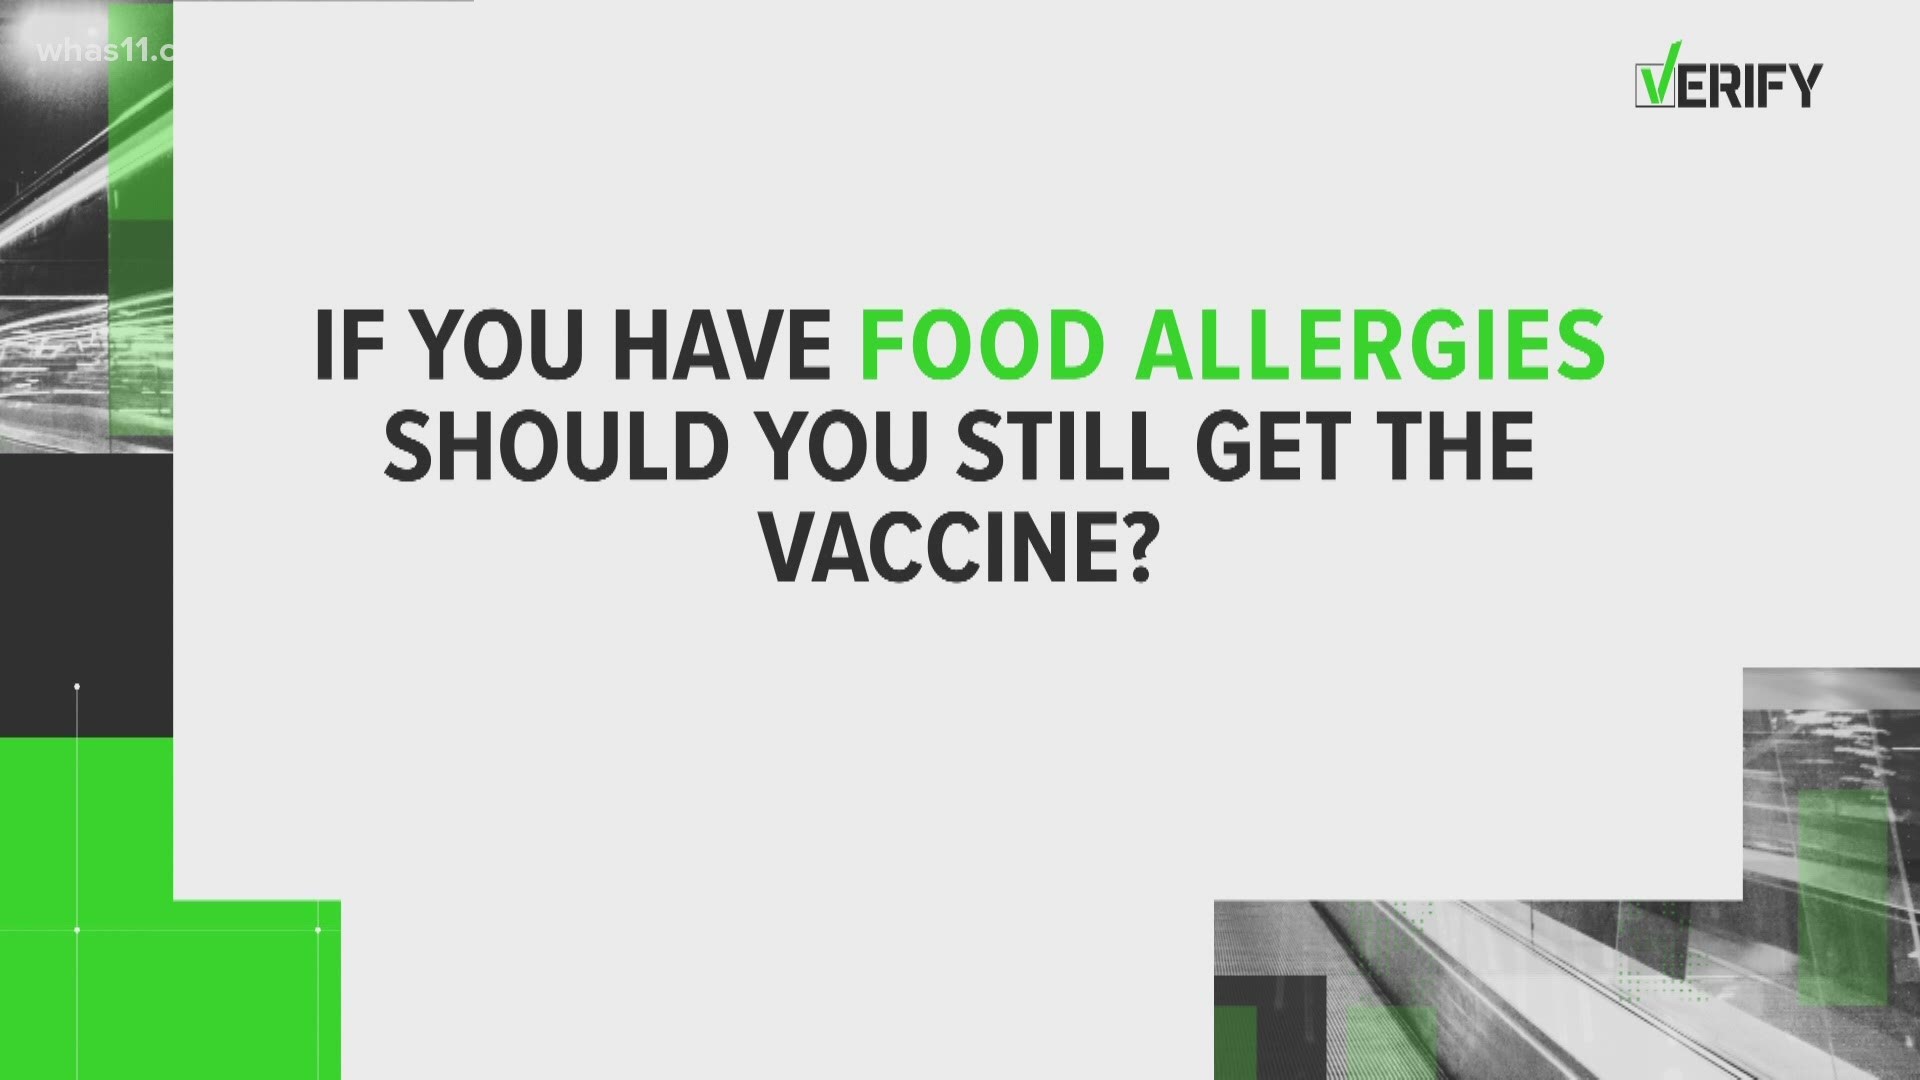 Some Americans may need to avoid the COVID-19 vaccine for allergies to pharmaceuticals, those with food allergies have the green light to get the shot.